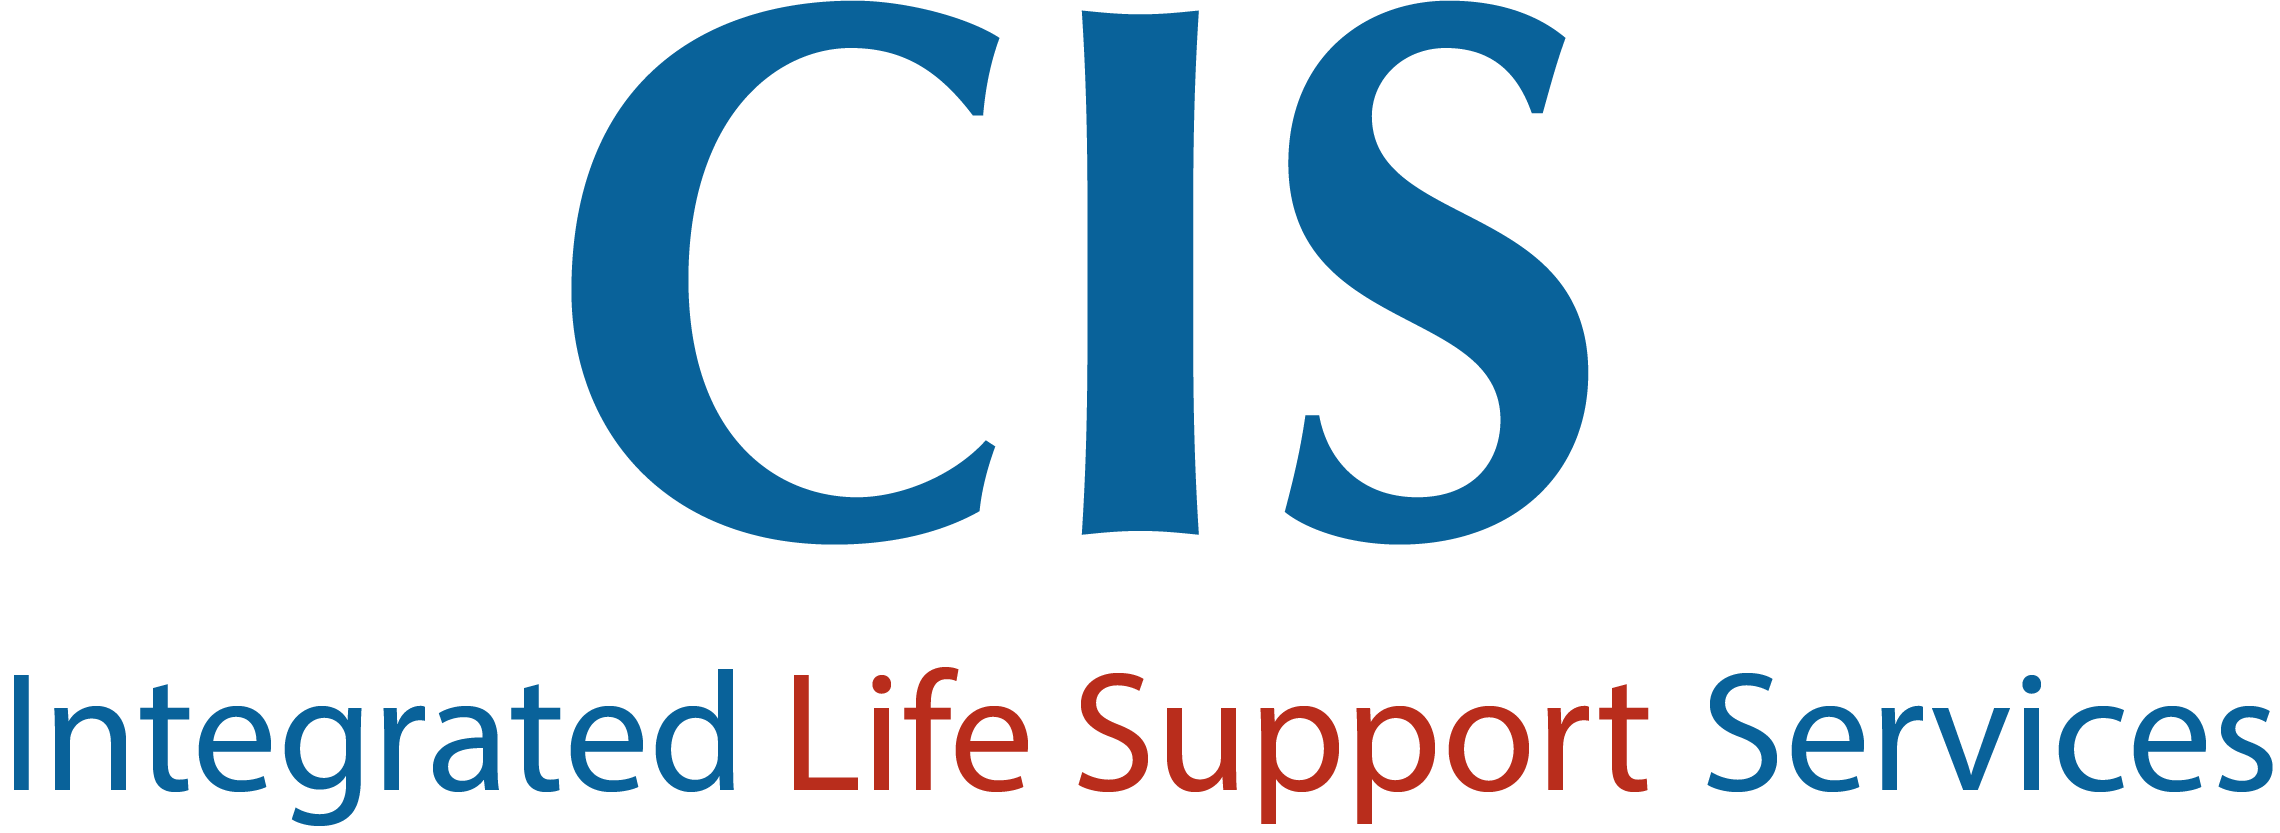 CIS Logo - CIS Groupe. Integrated Life Support Services